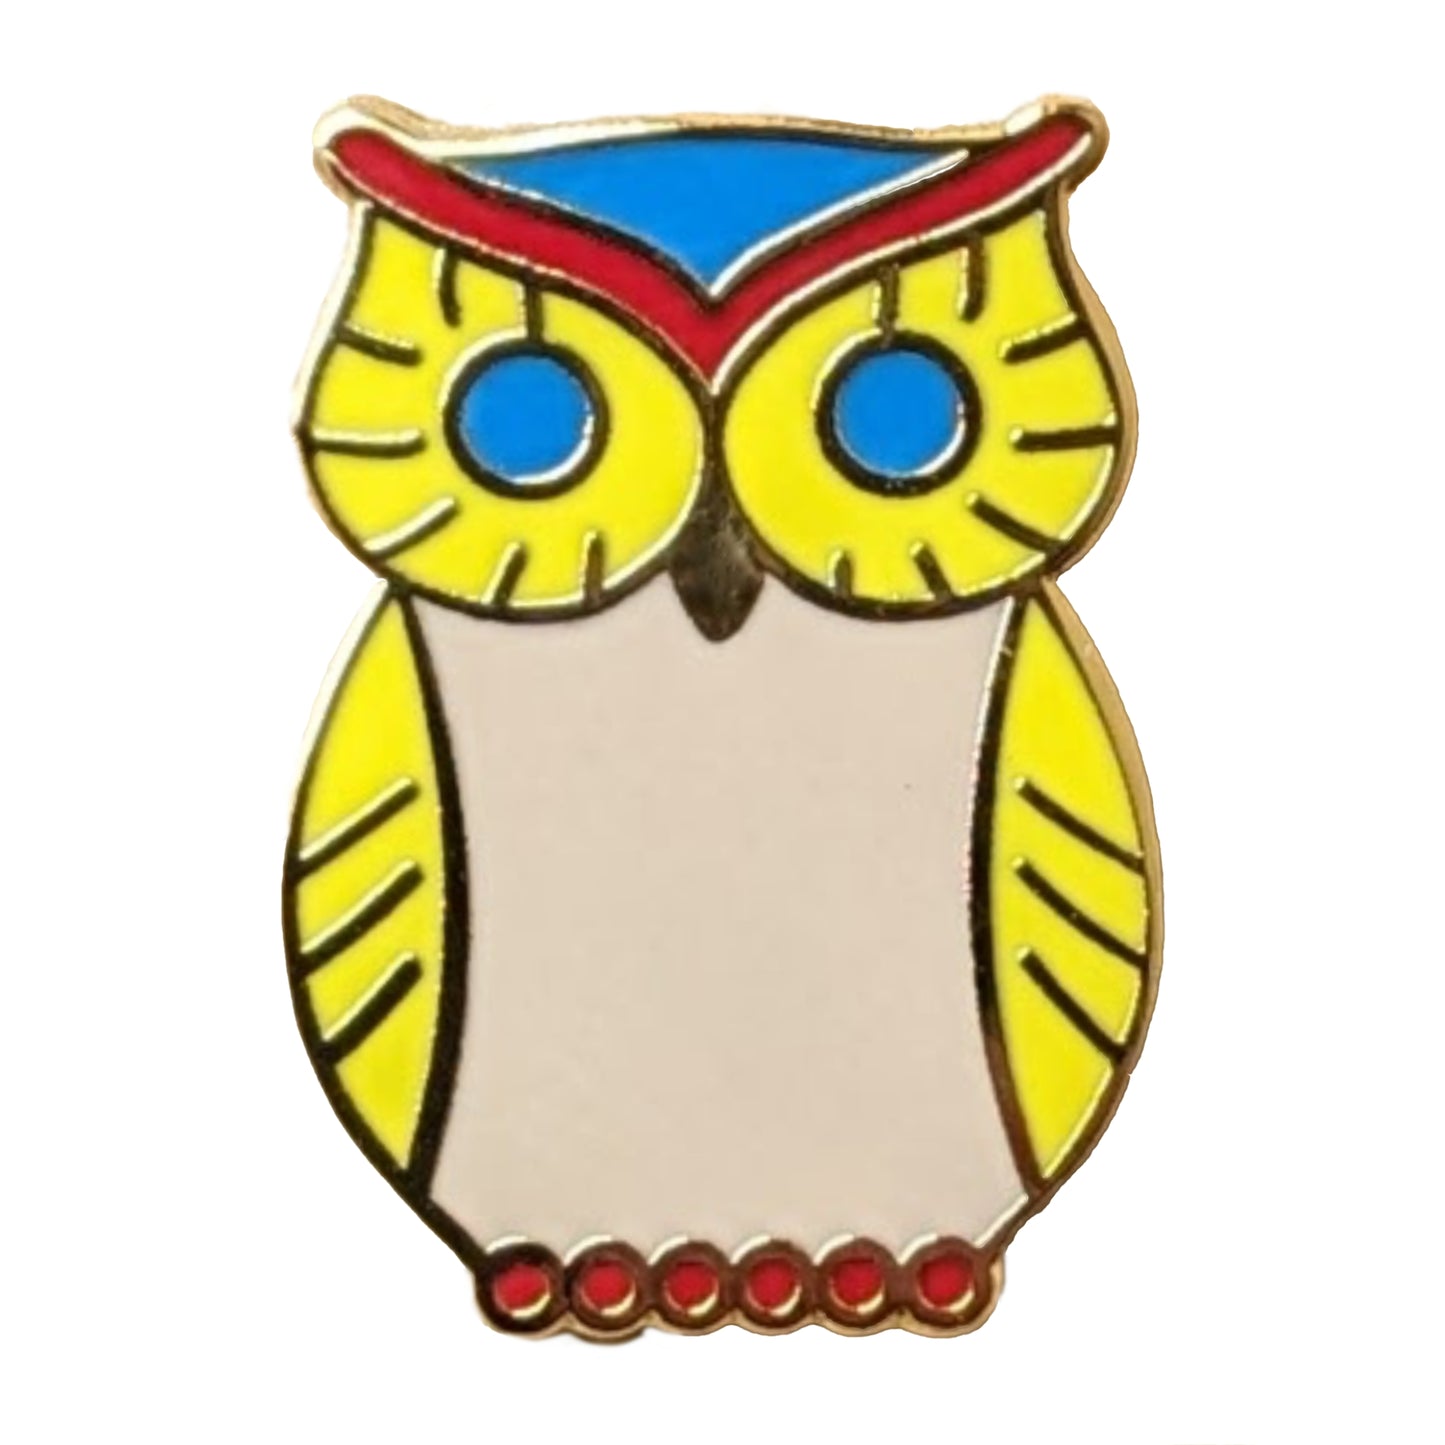 Owl Pin Badge - The Great Yorkshire Shop